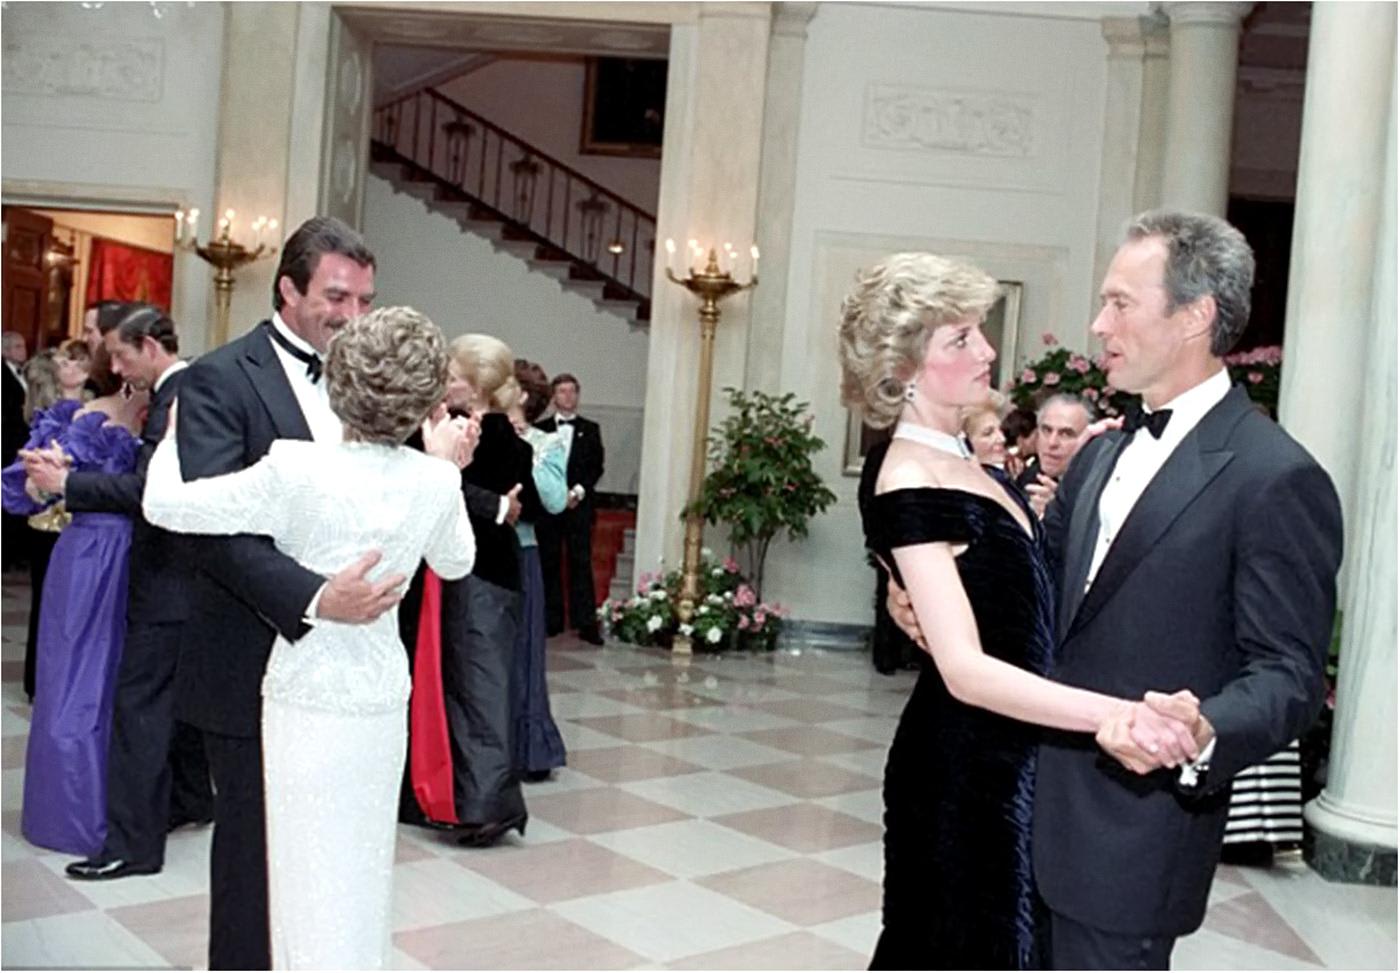 Tom Selleck, Nancy Reagan, Clint Eastwood and Princess Diana dancing at the White House in 1985